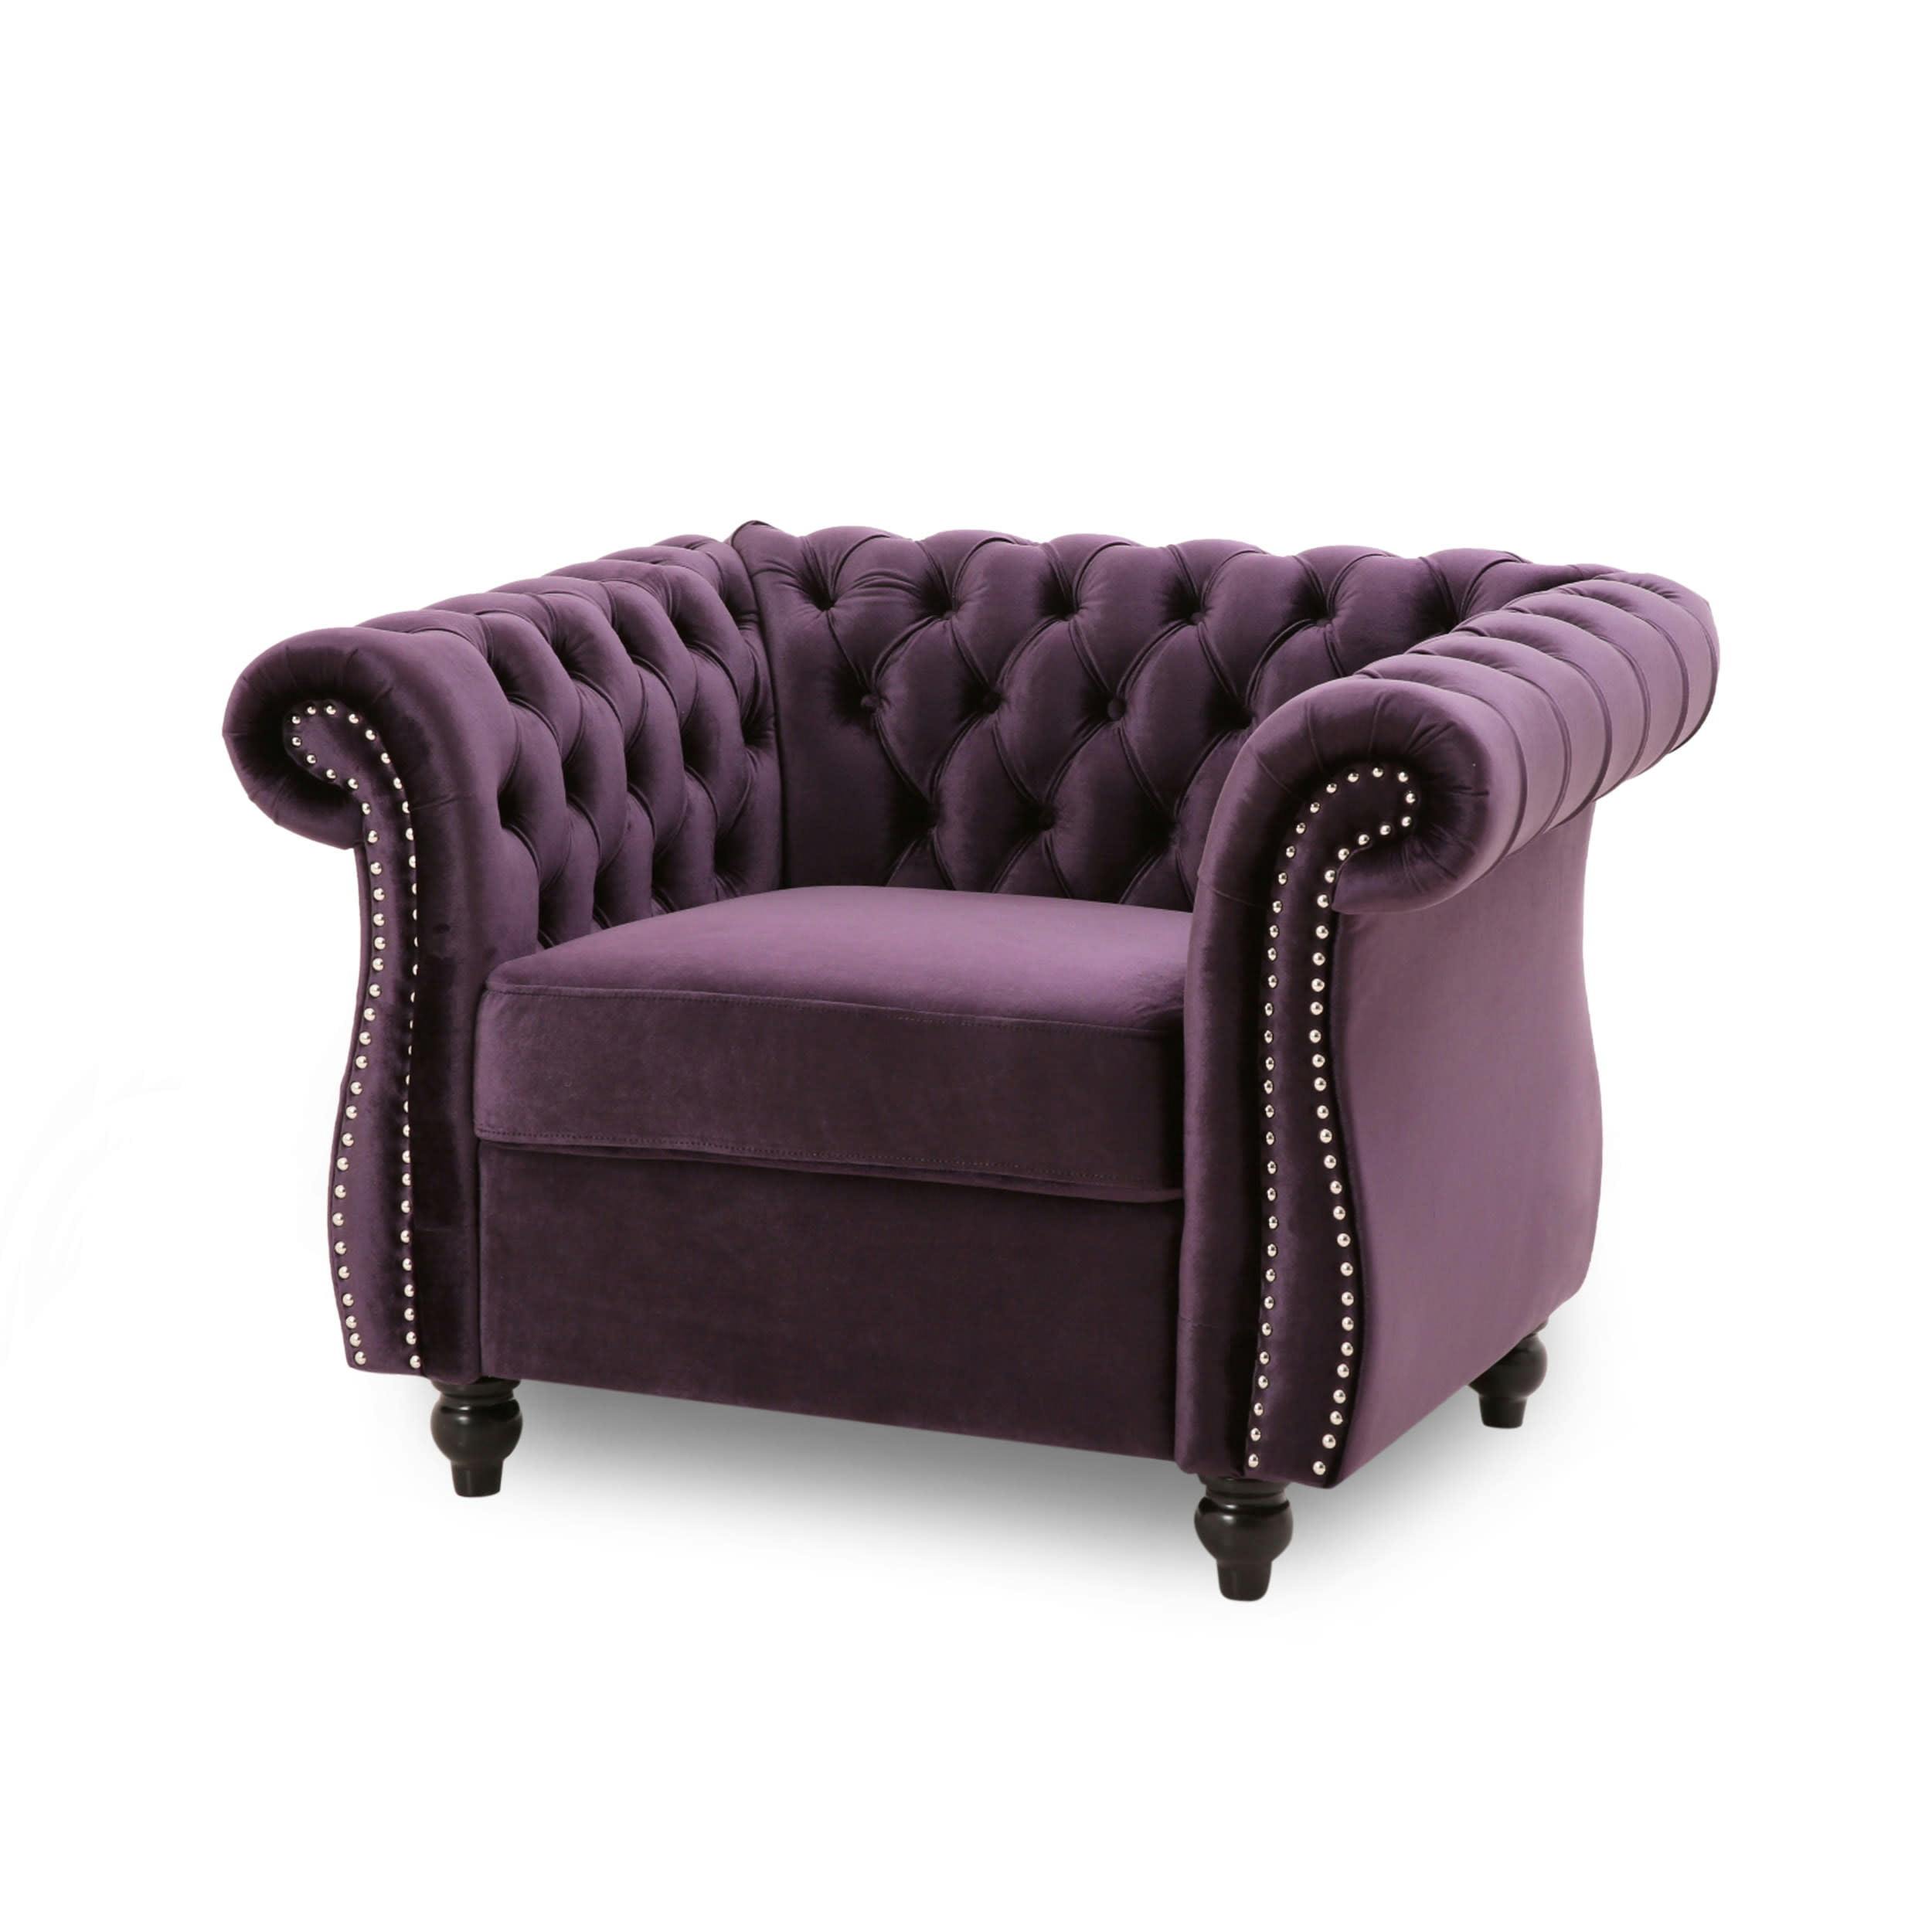 Blackberry Velvet Chesterfield Club Chair with Nailhead Accents